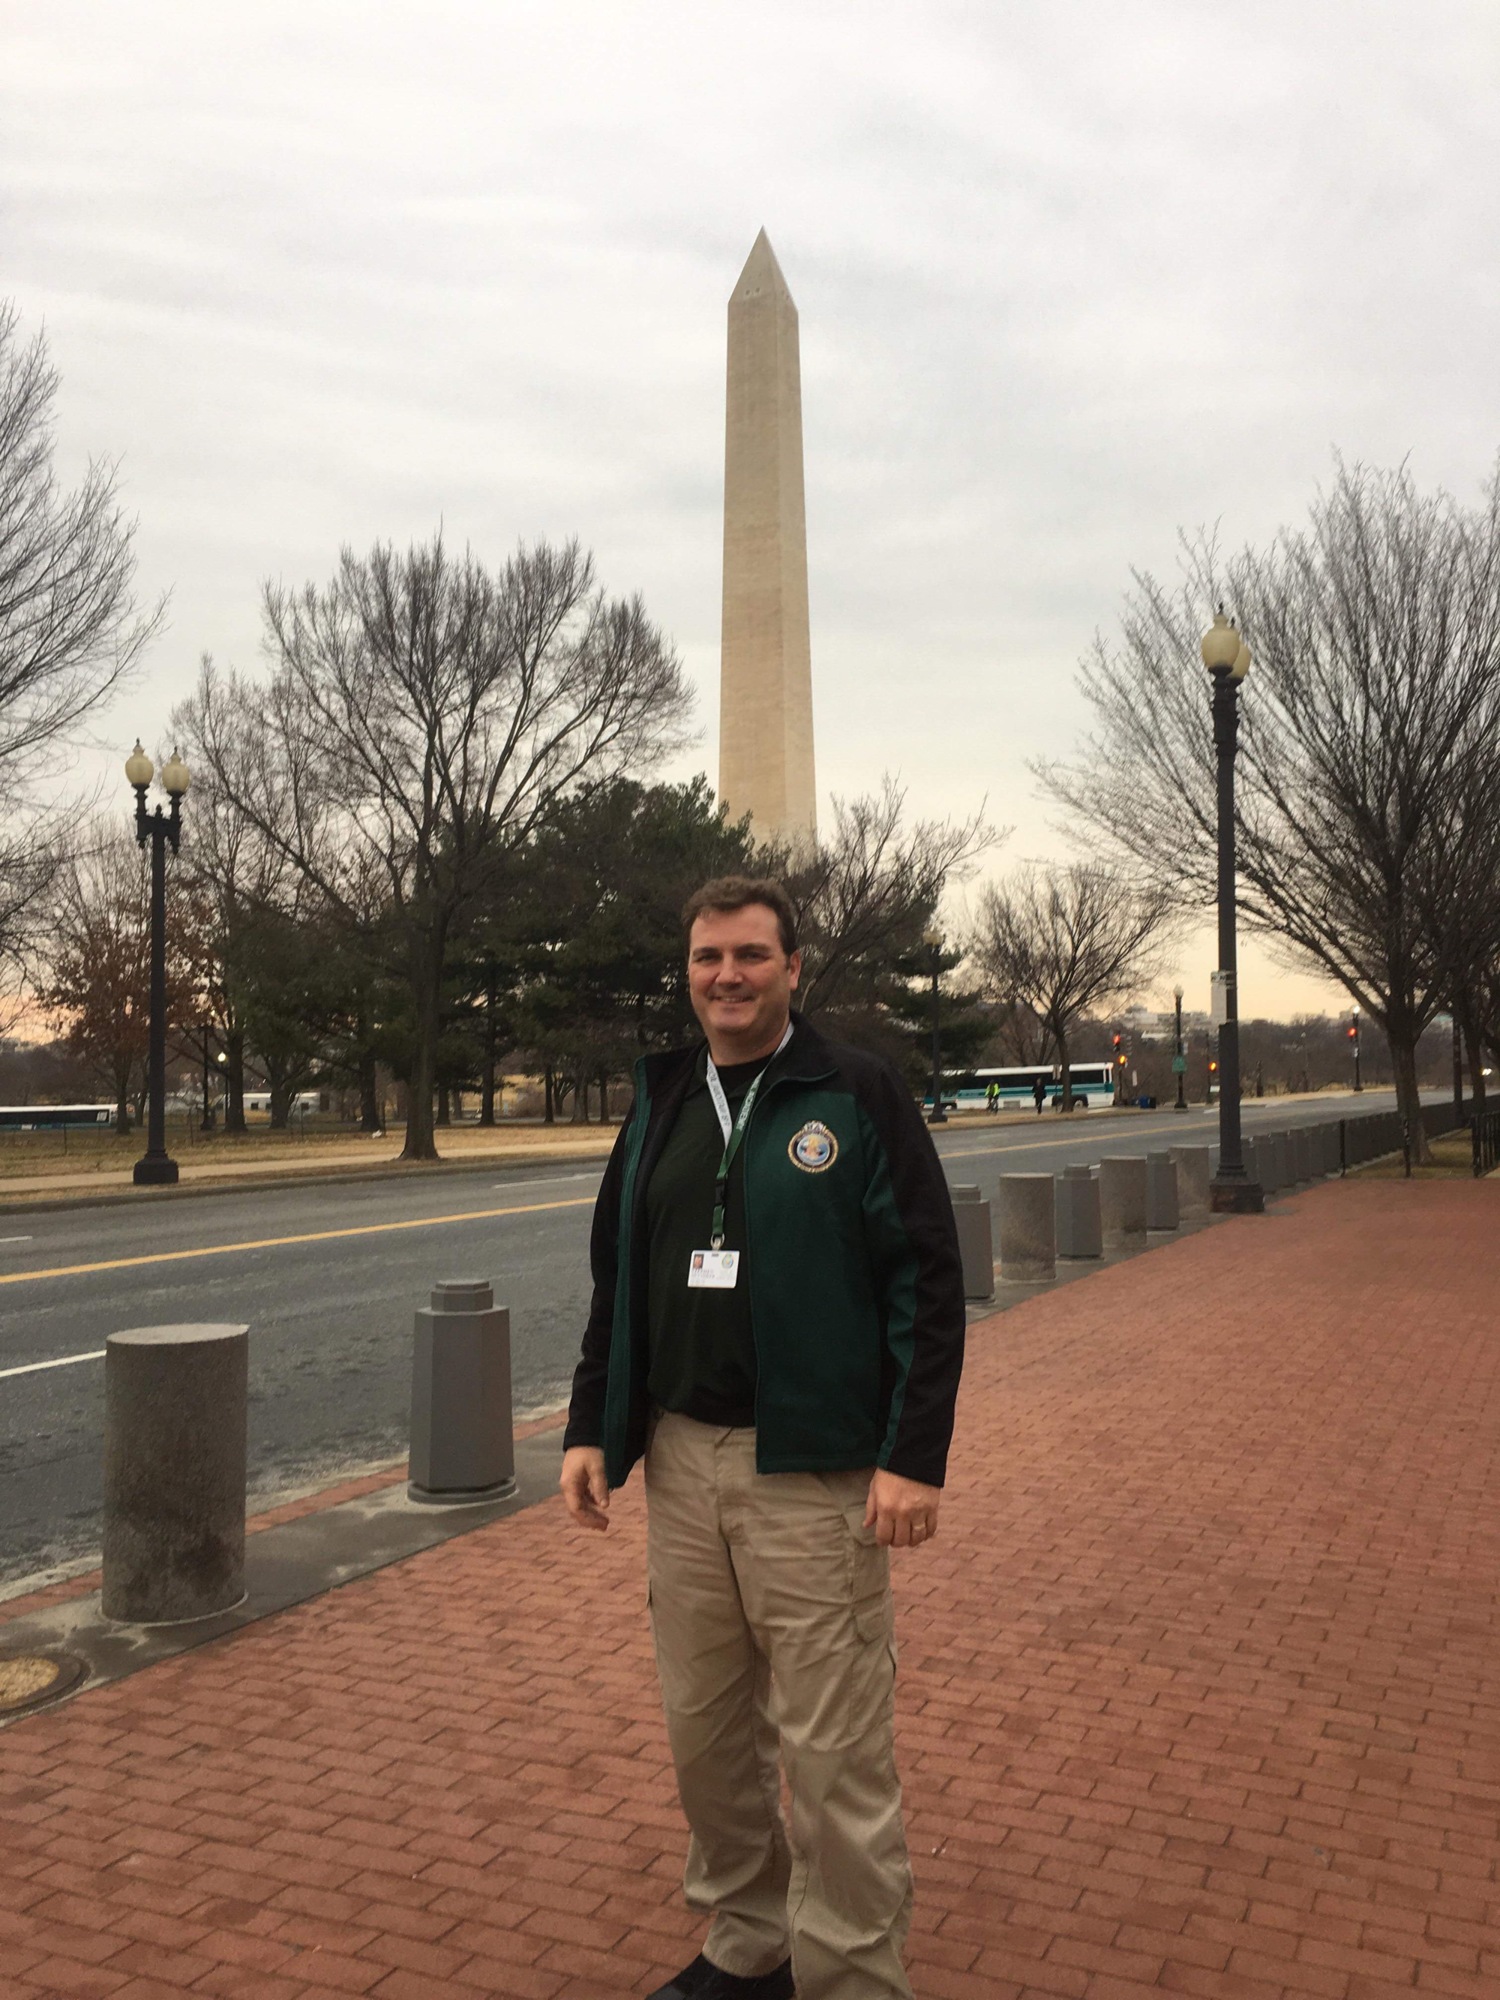 Steve McCosker has had the opportunity to go sightseeing while enrolled in the program.